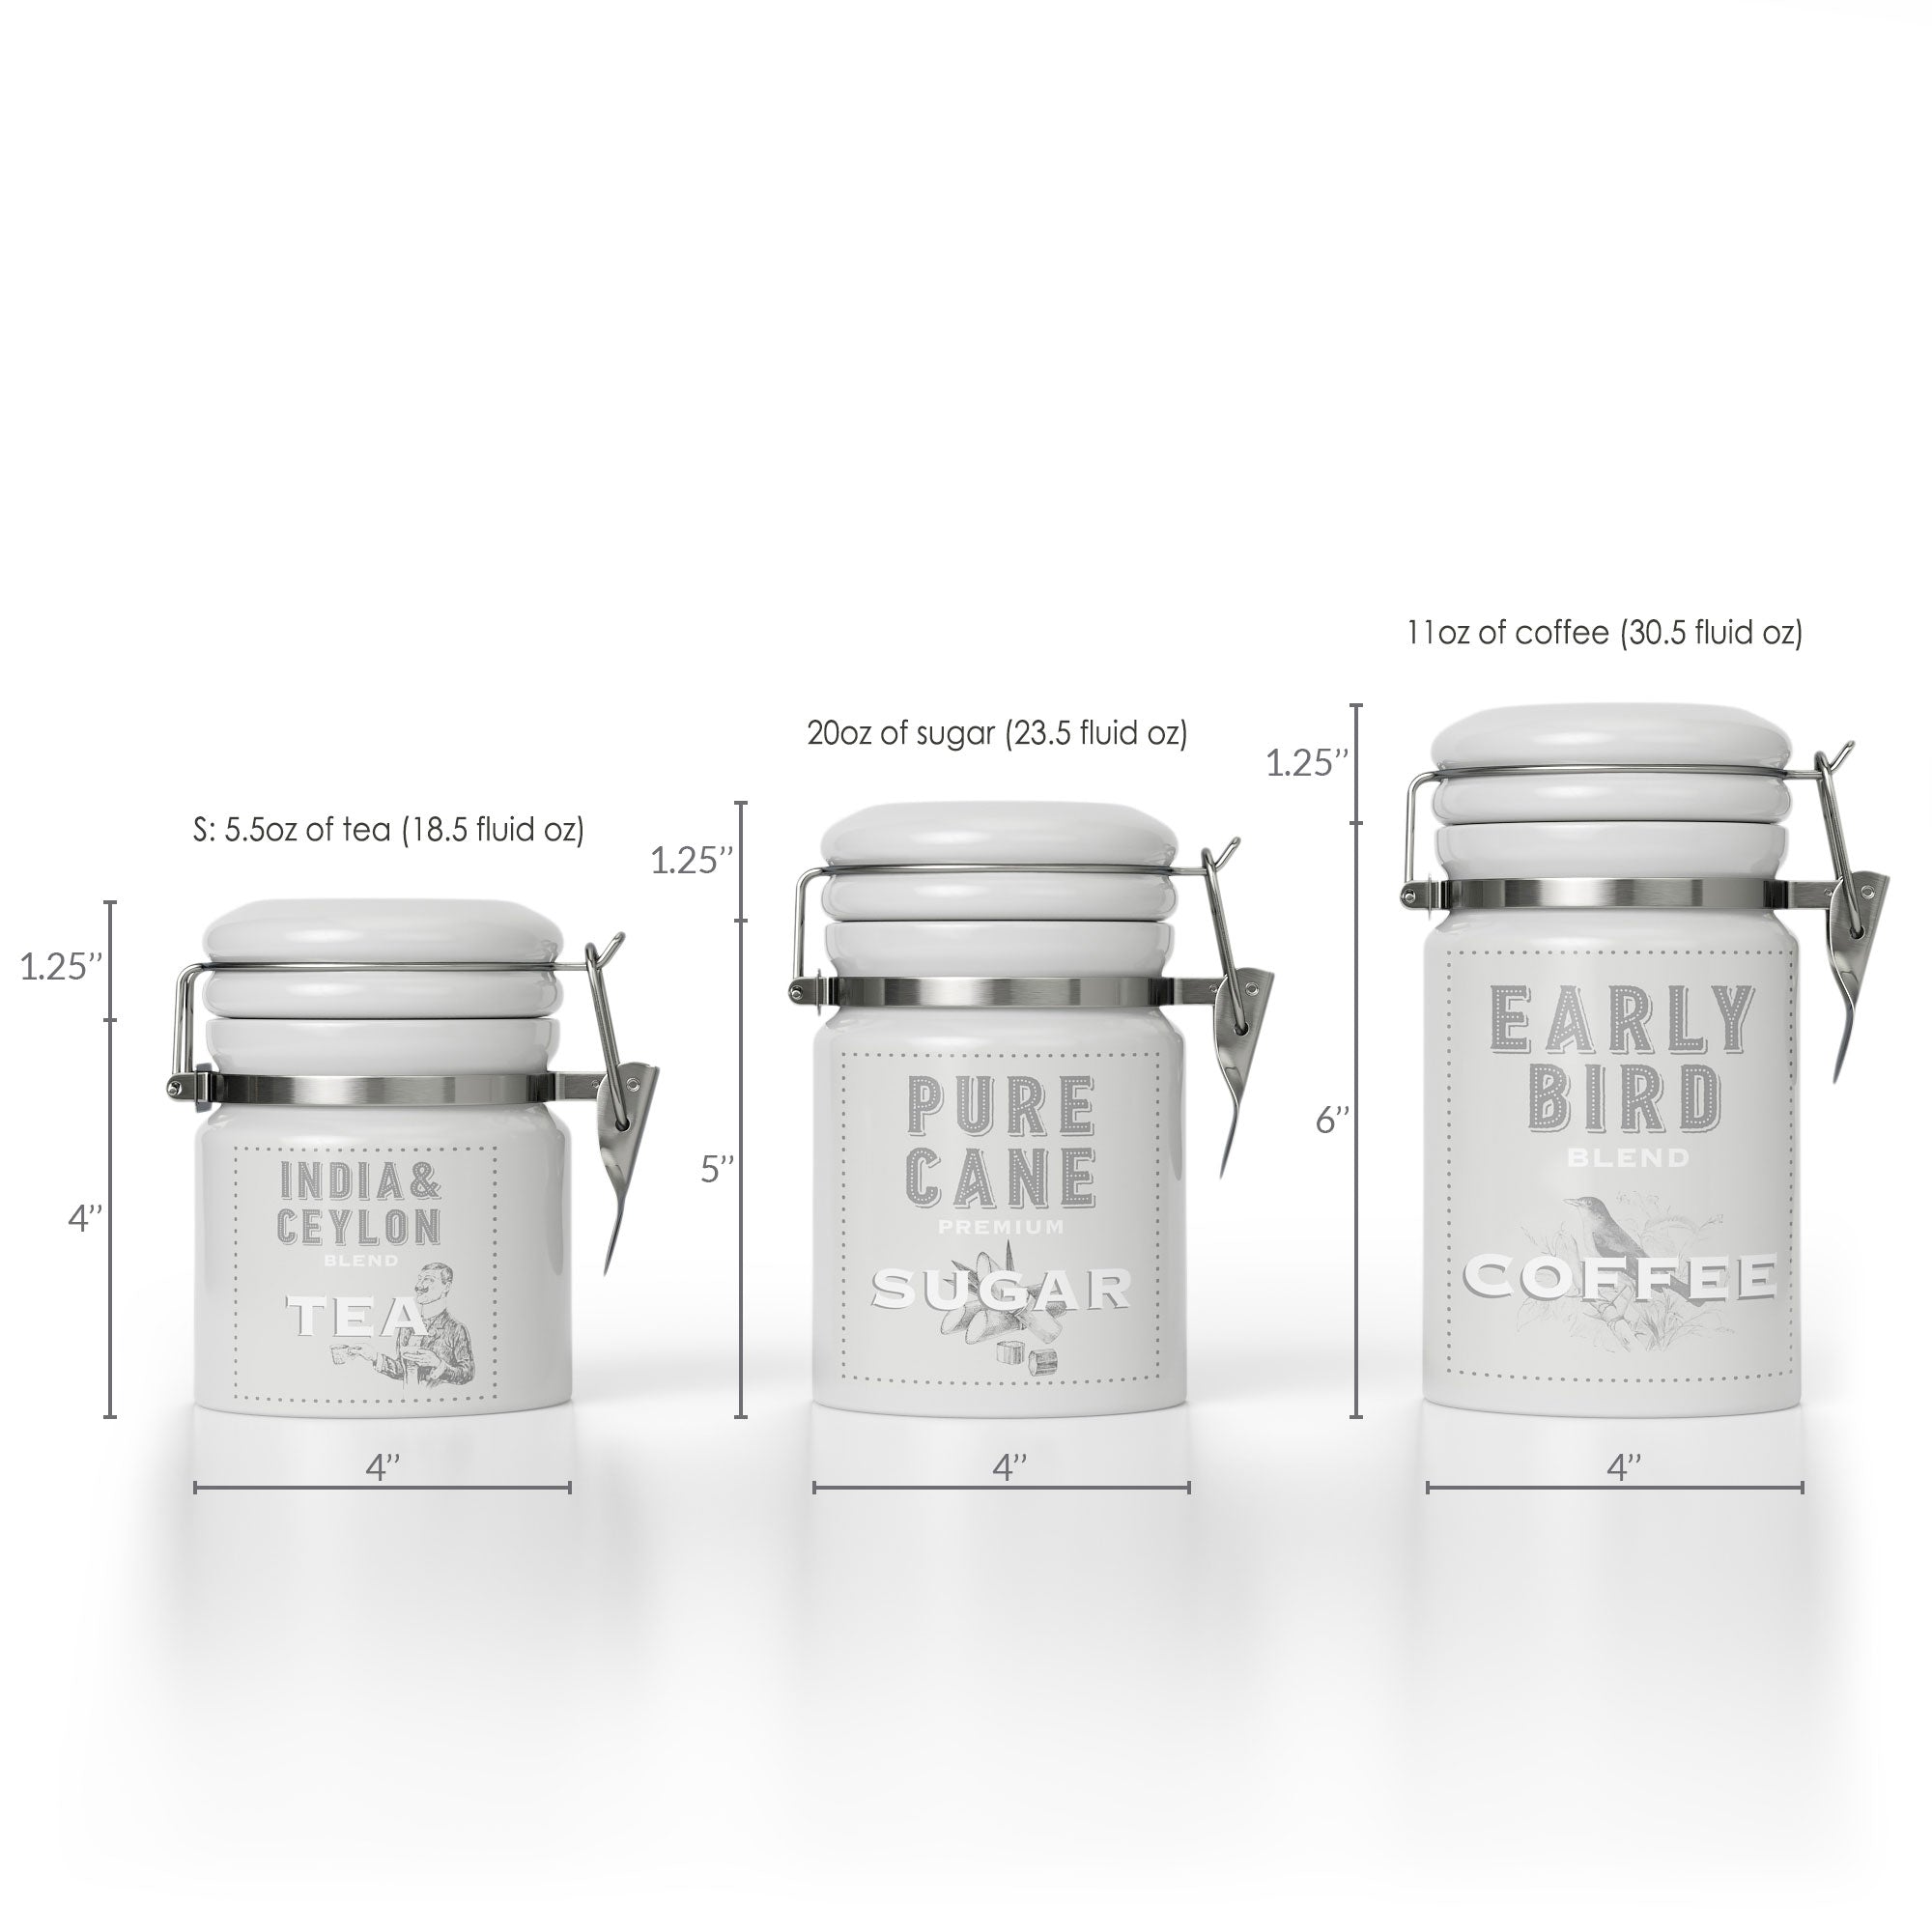 Kitchen Storage Containers With Lids Set of 6 Kitchen Canisters